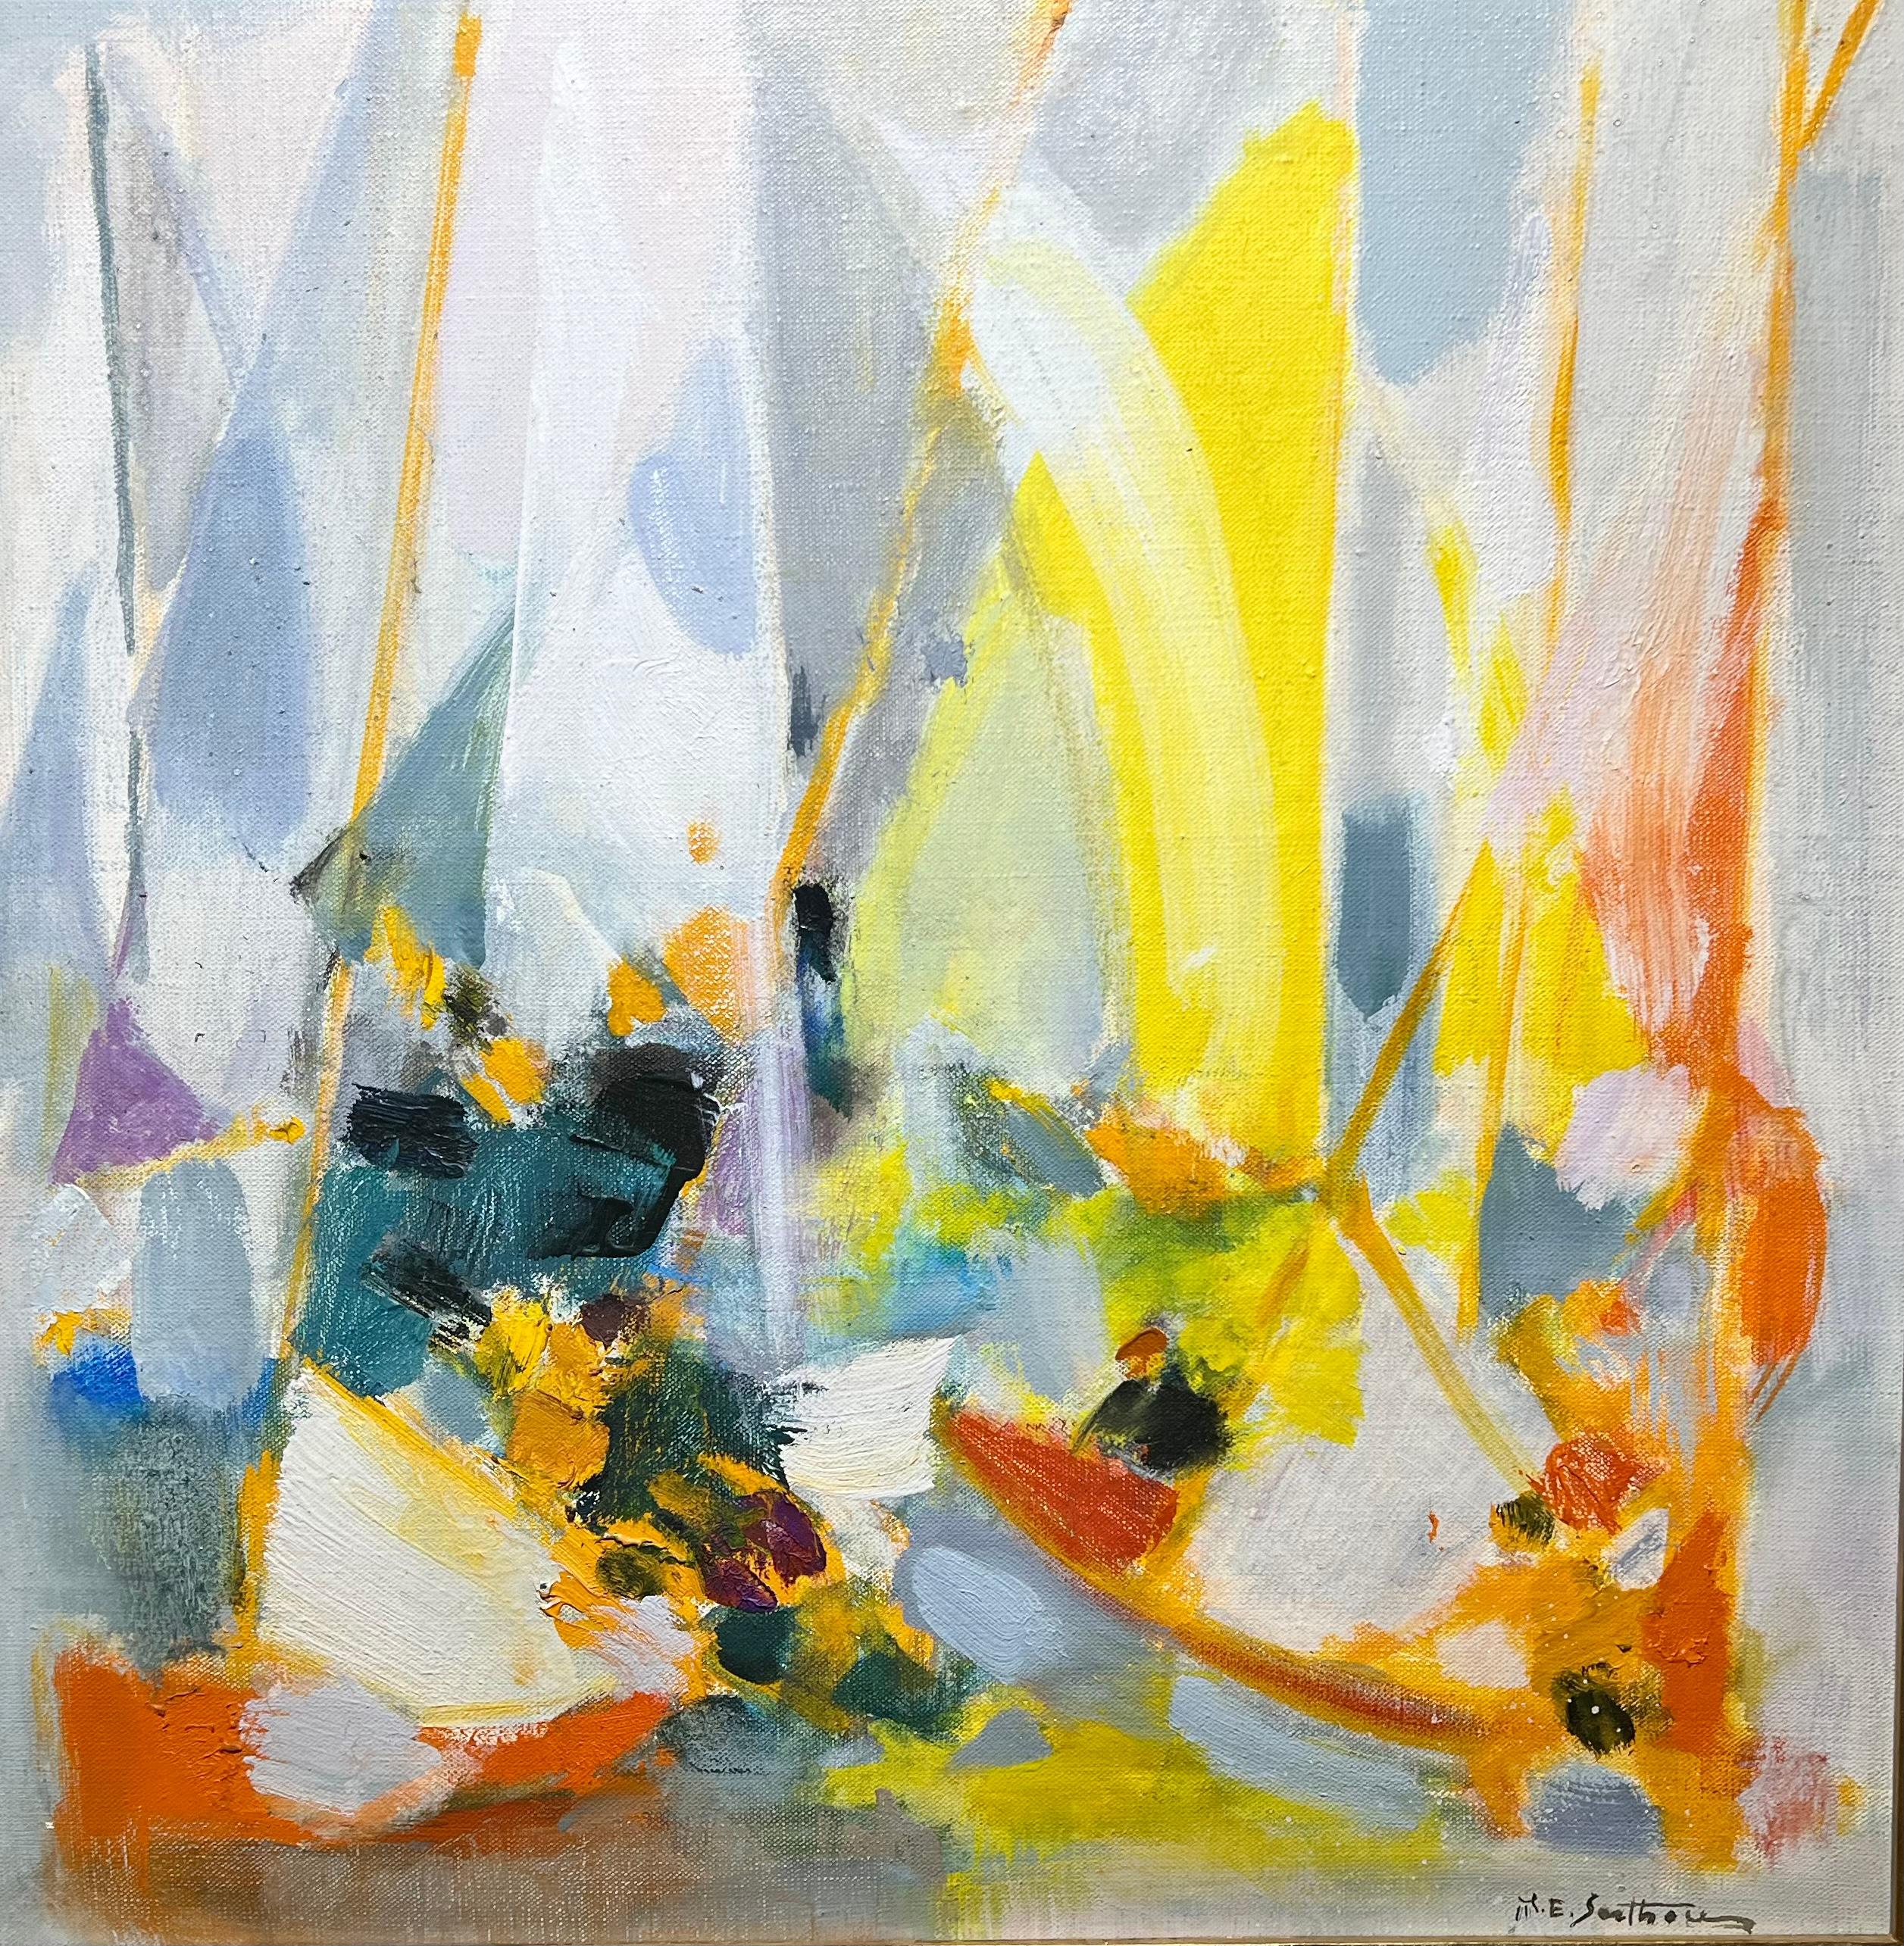 Maurice Élie Sarthou Abstract Painting - 1966 French Colorful Abstract Expressionist Painting “Regates a La Voile Jaun” 